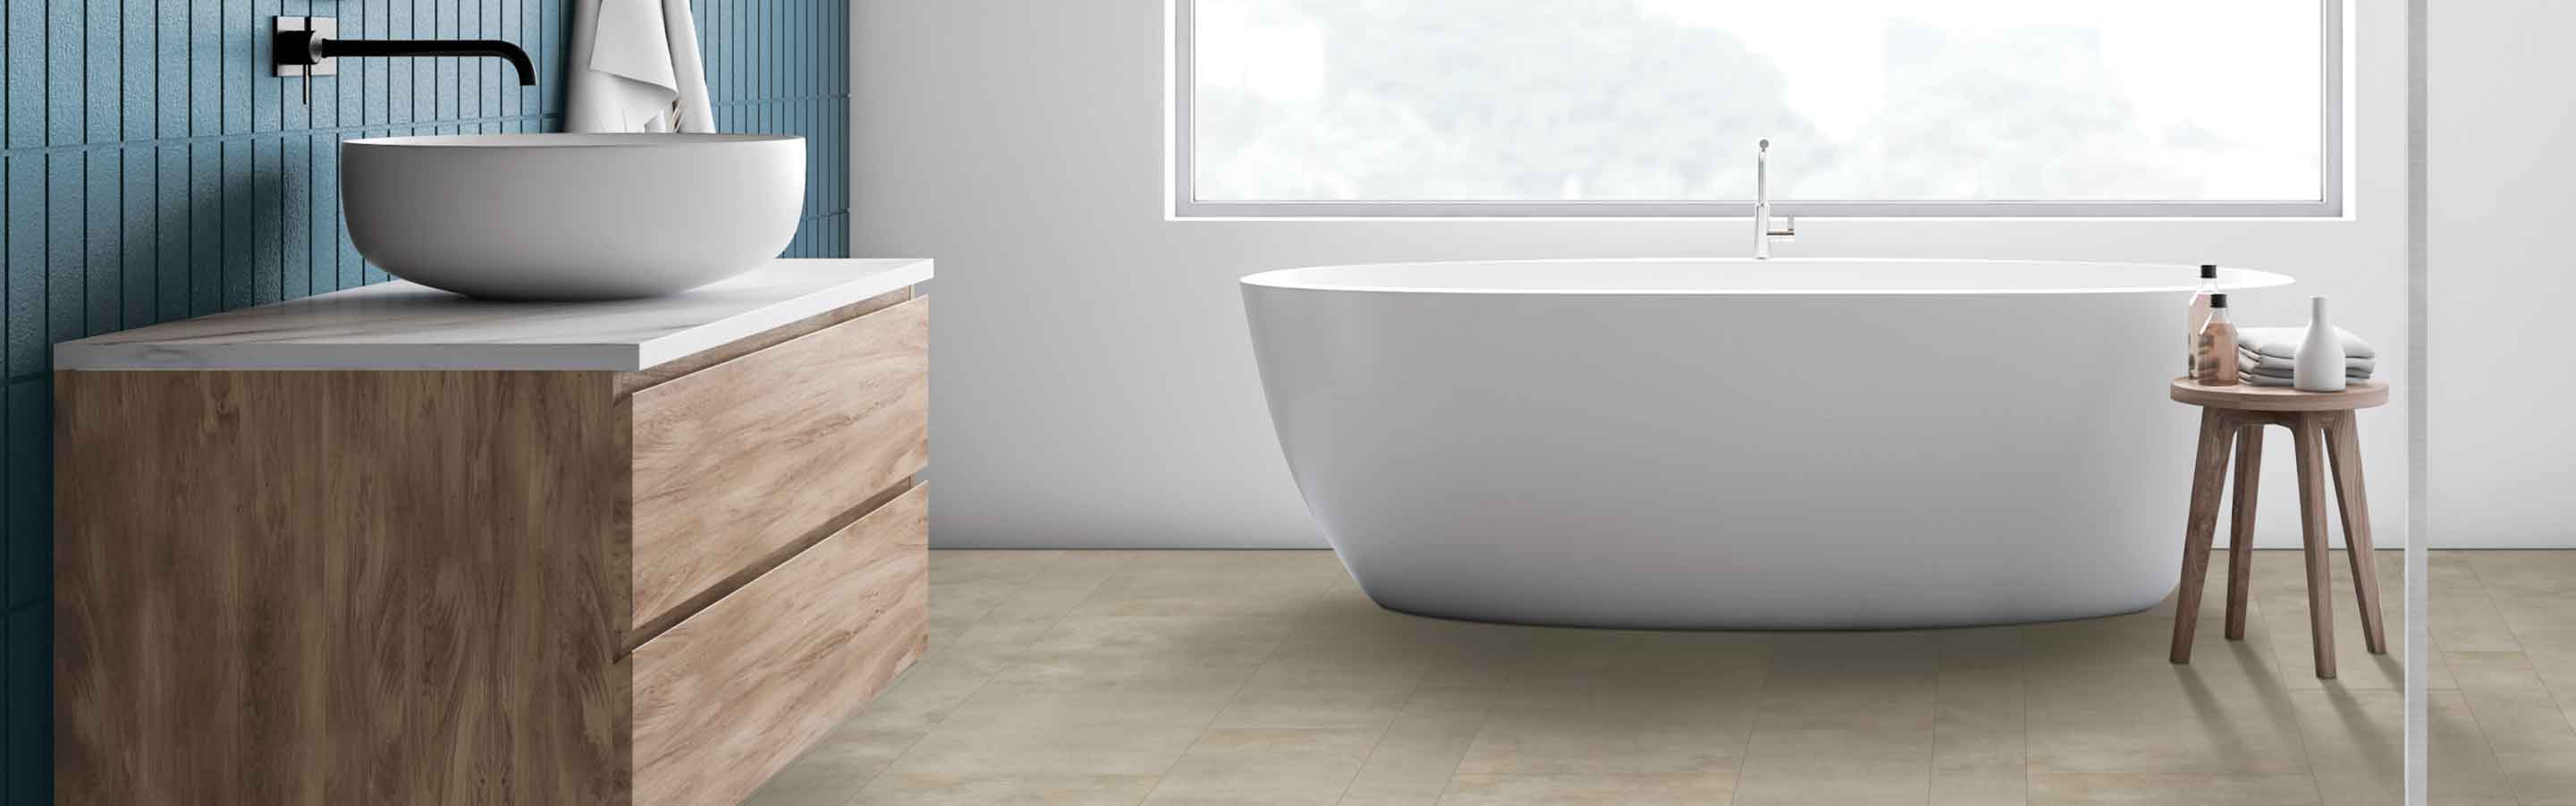 VInyl tile flooring in bath with traditional tub and window 